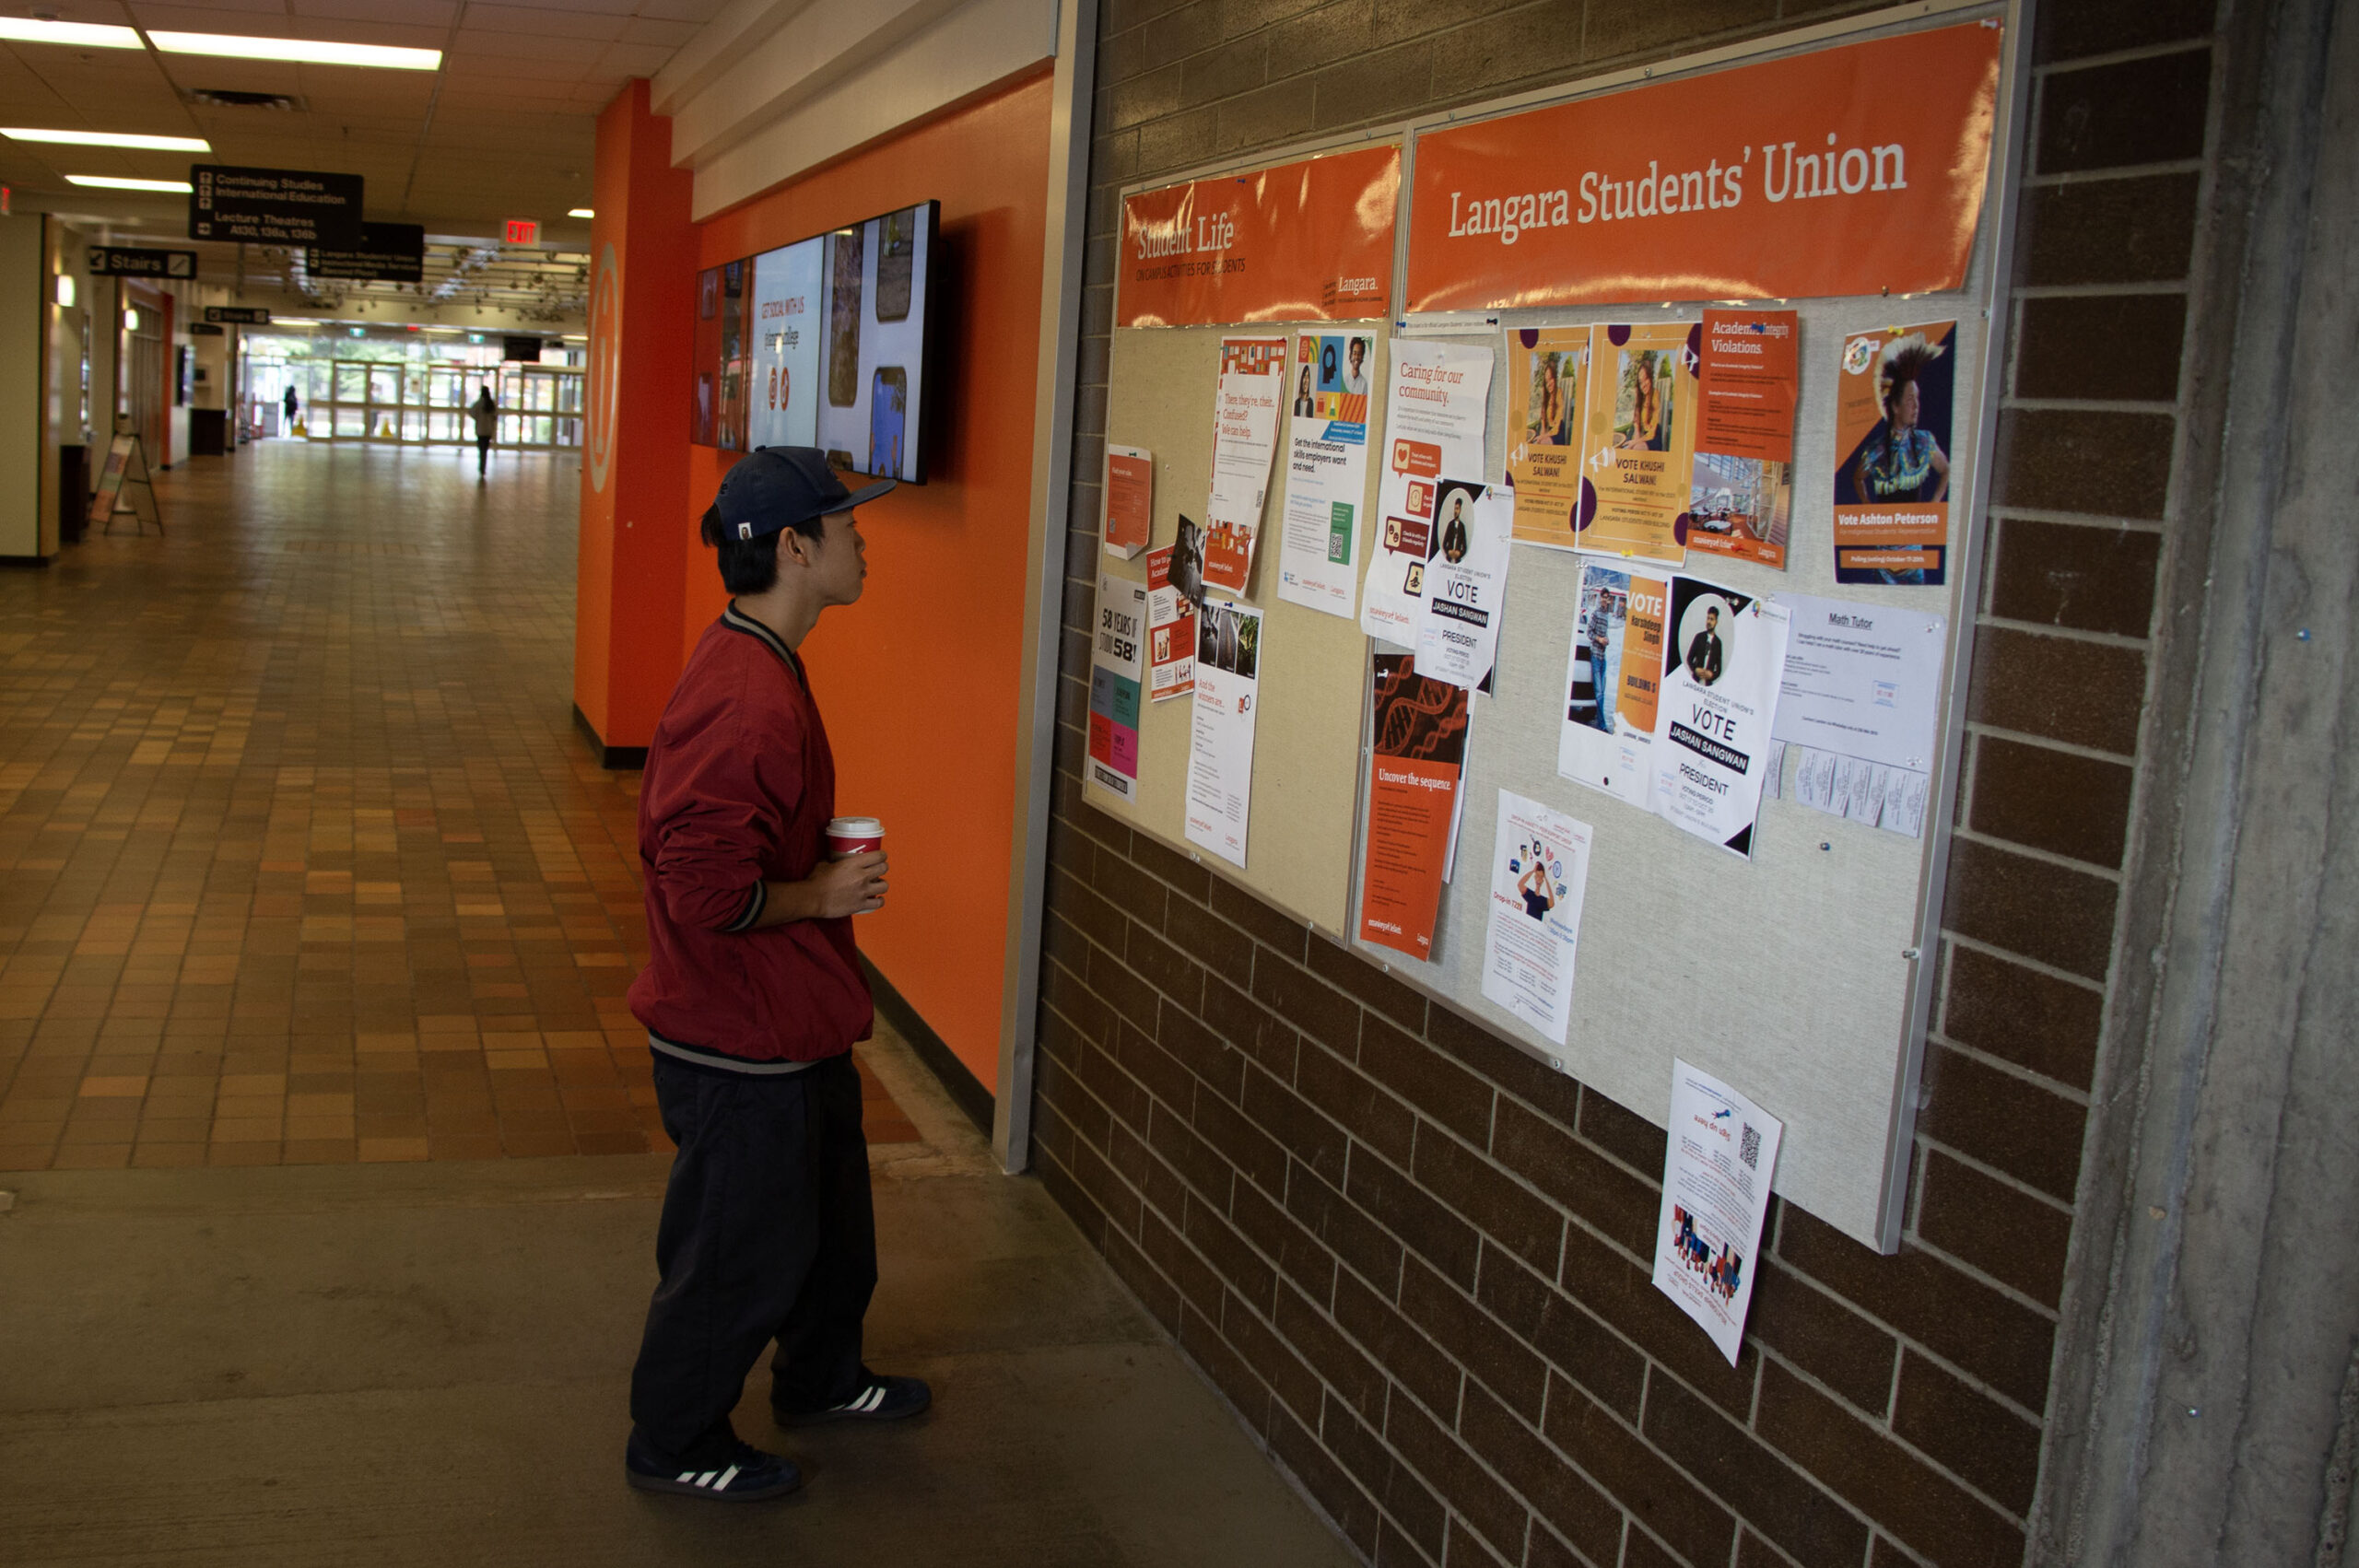 A student looks at the Langara Students' Union bulletin board with various flyers pinned.